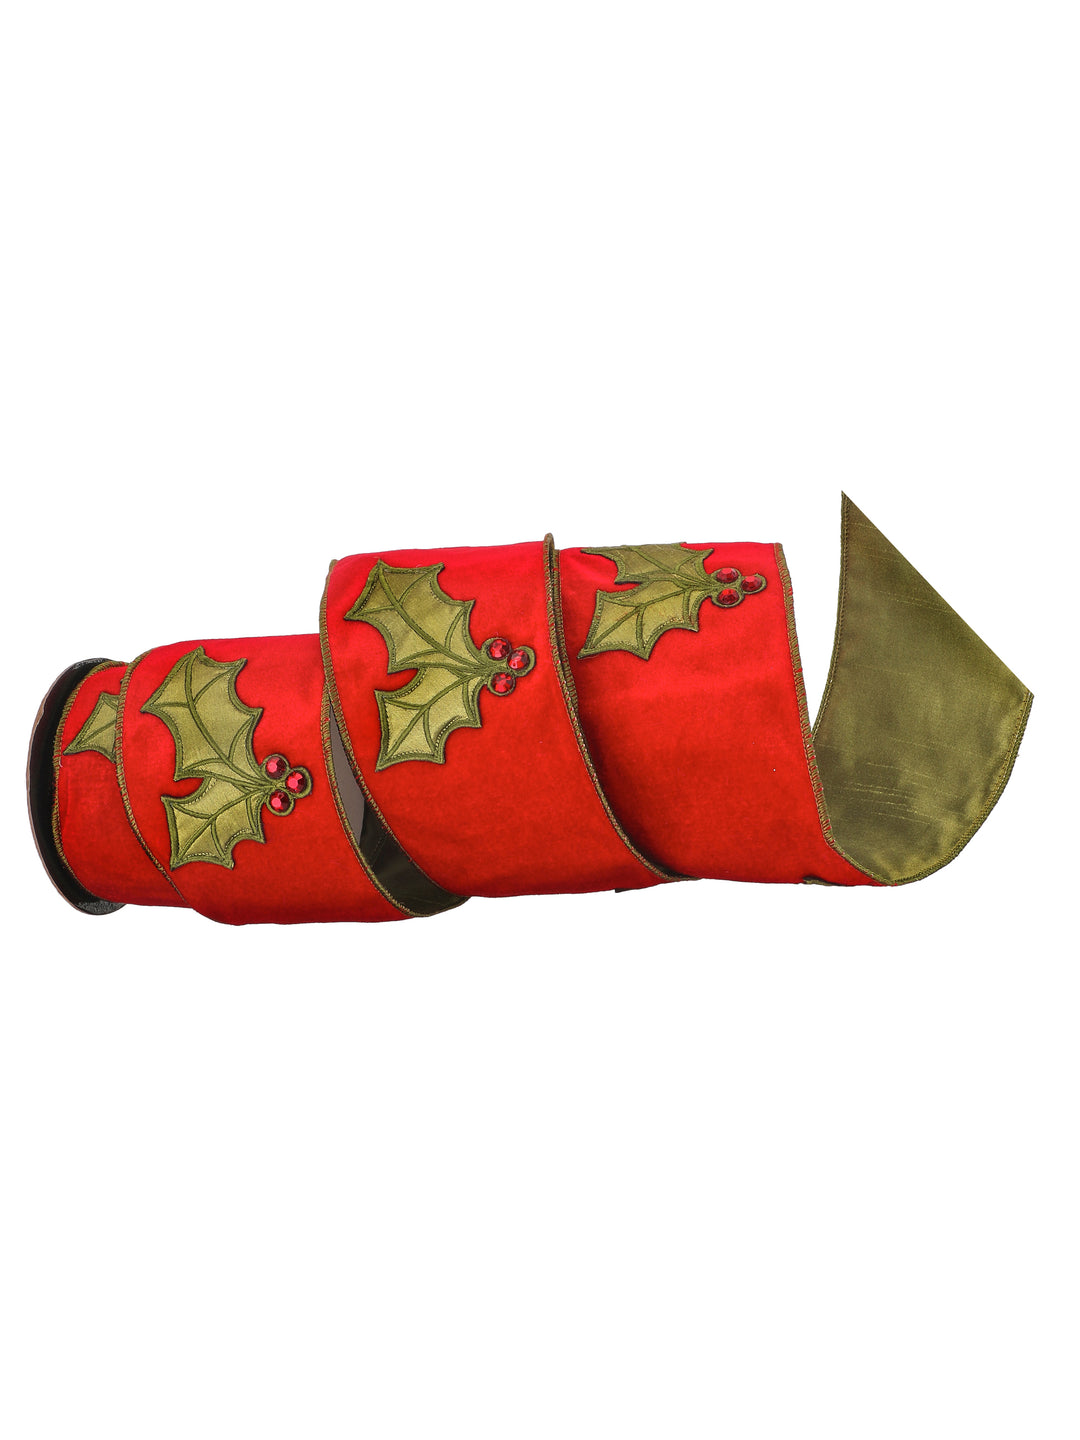 Regency 4" x 5 YD Velvet Embroidered Holly Leaf/Jewel Wired Ribbon in Red/Green